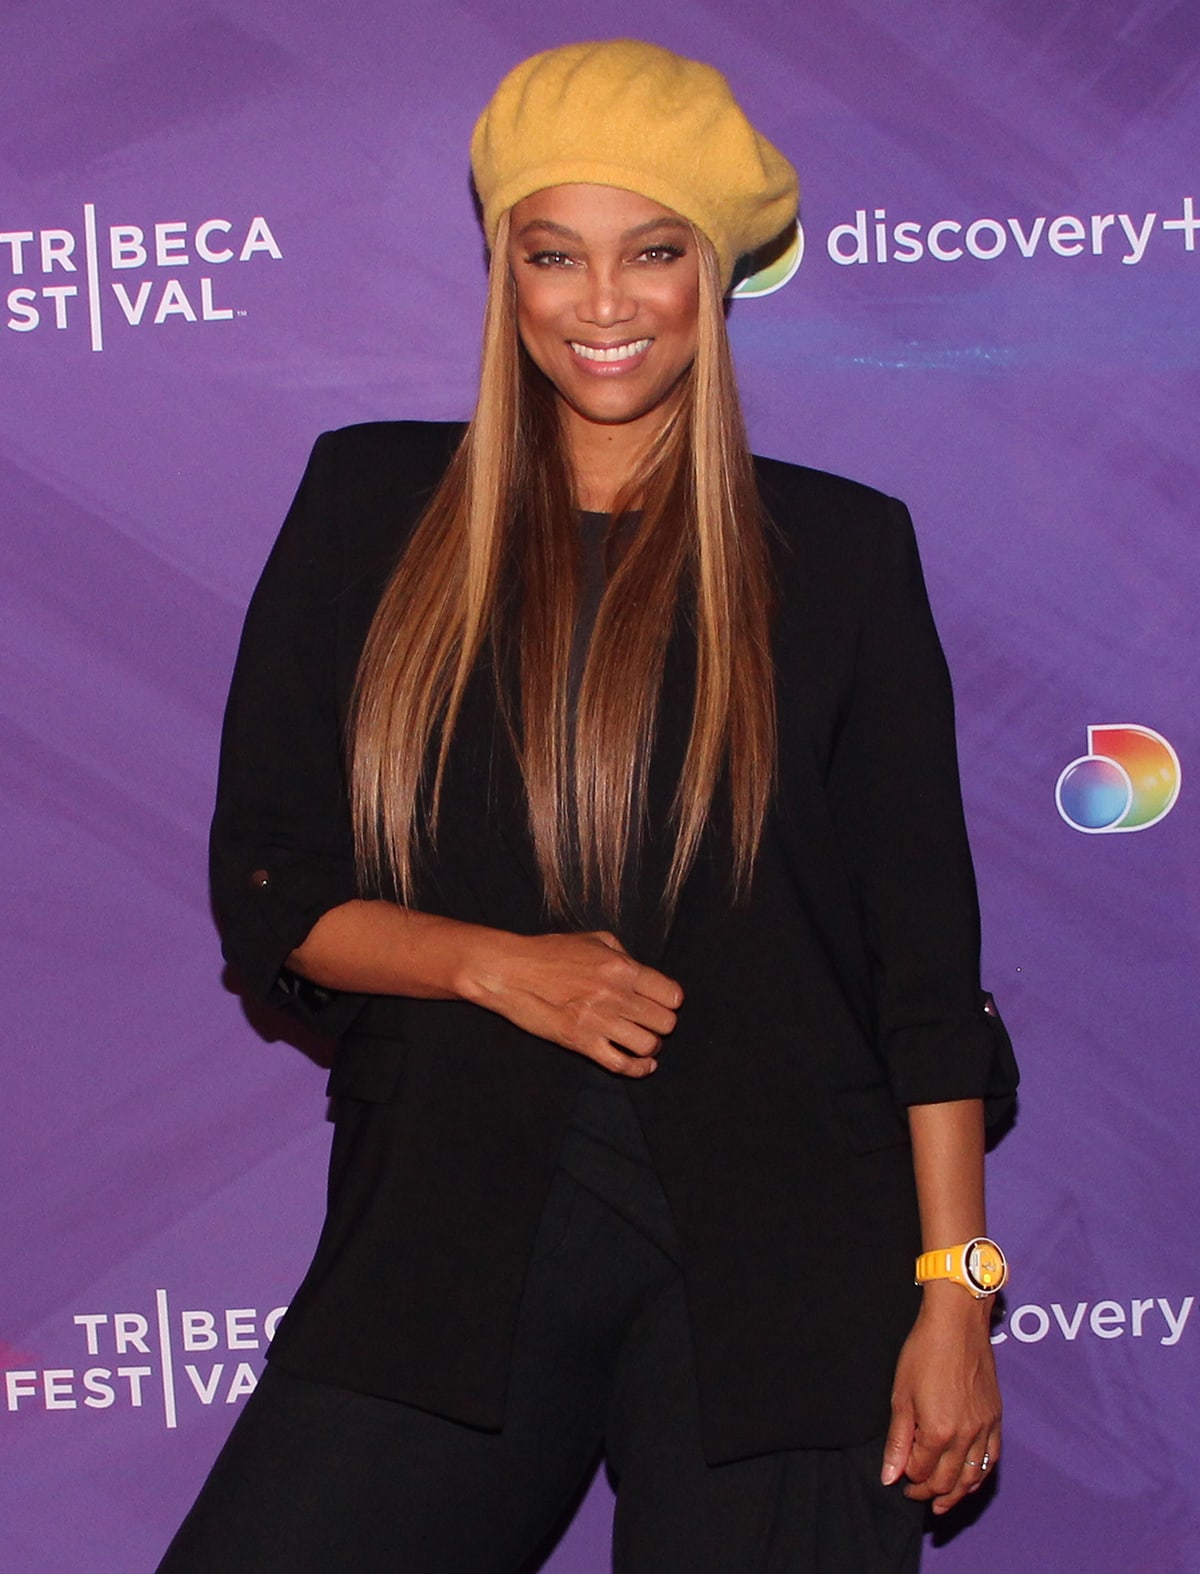 Tyra Banks is leaving Dancing with the Stars to focus on her business